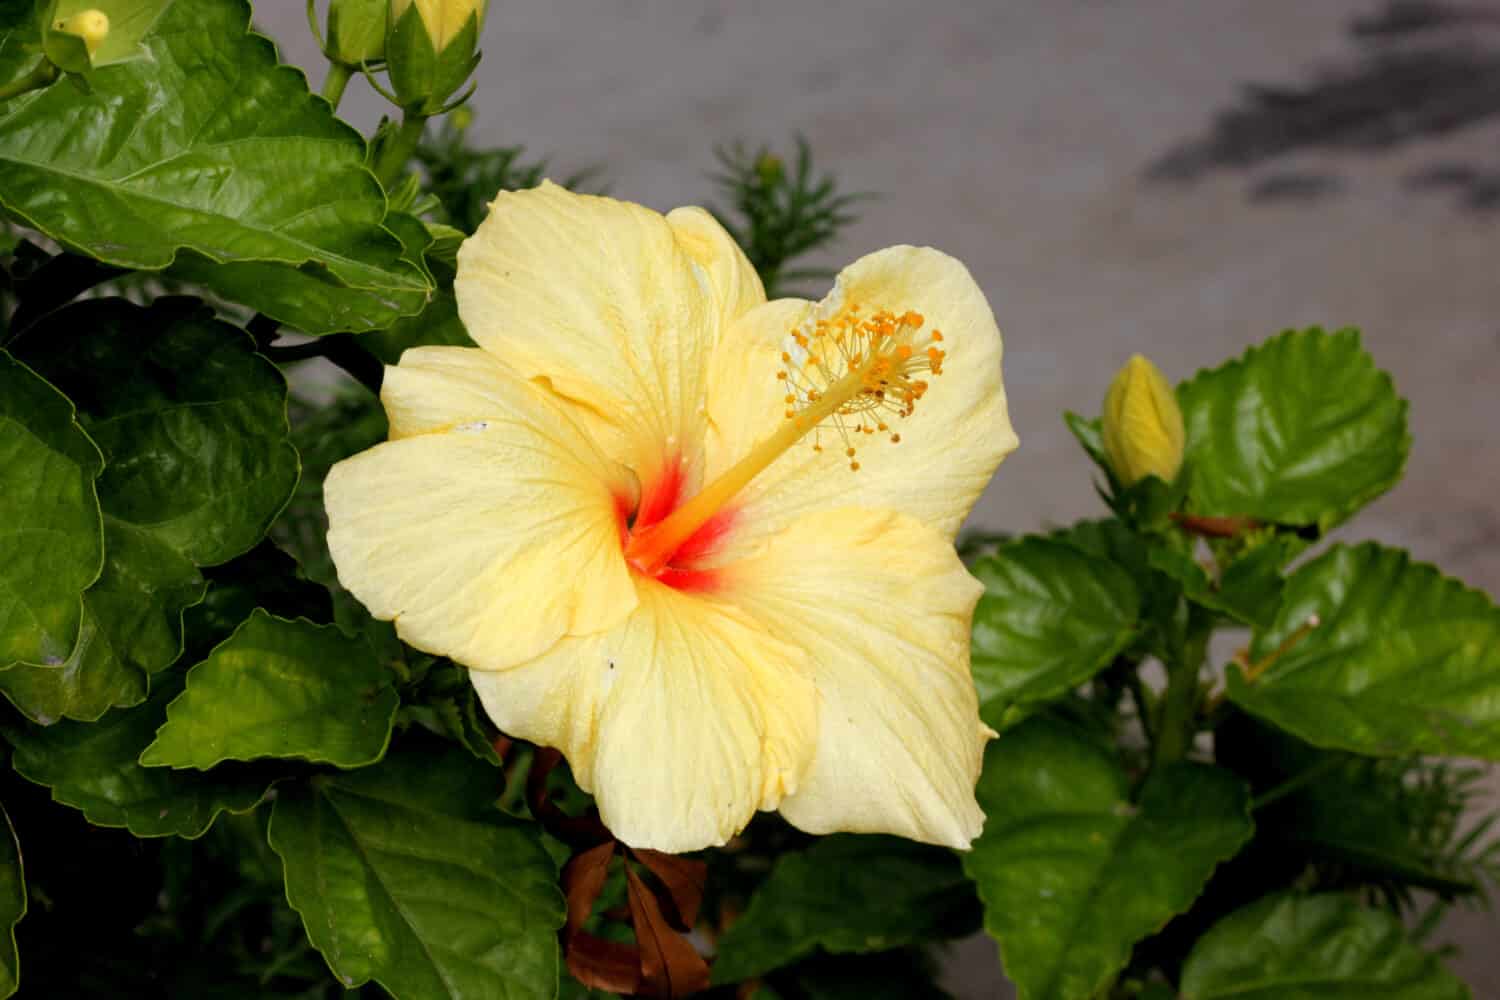 Hibiscus rosa-sinensis 'Hula Girl', China rose,  evergreen shrub or small tree, cultivar with green leaves and large rich yellow flowers with red throat with long exerted staminal column.